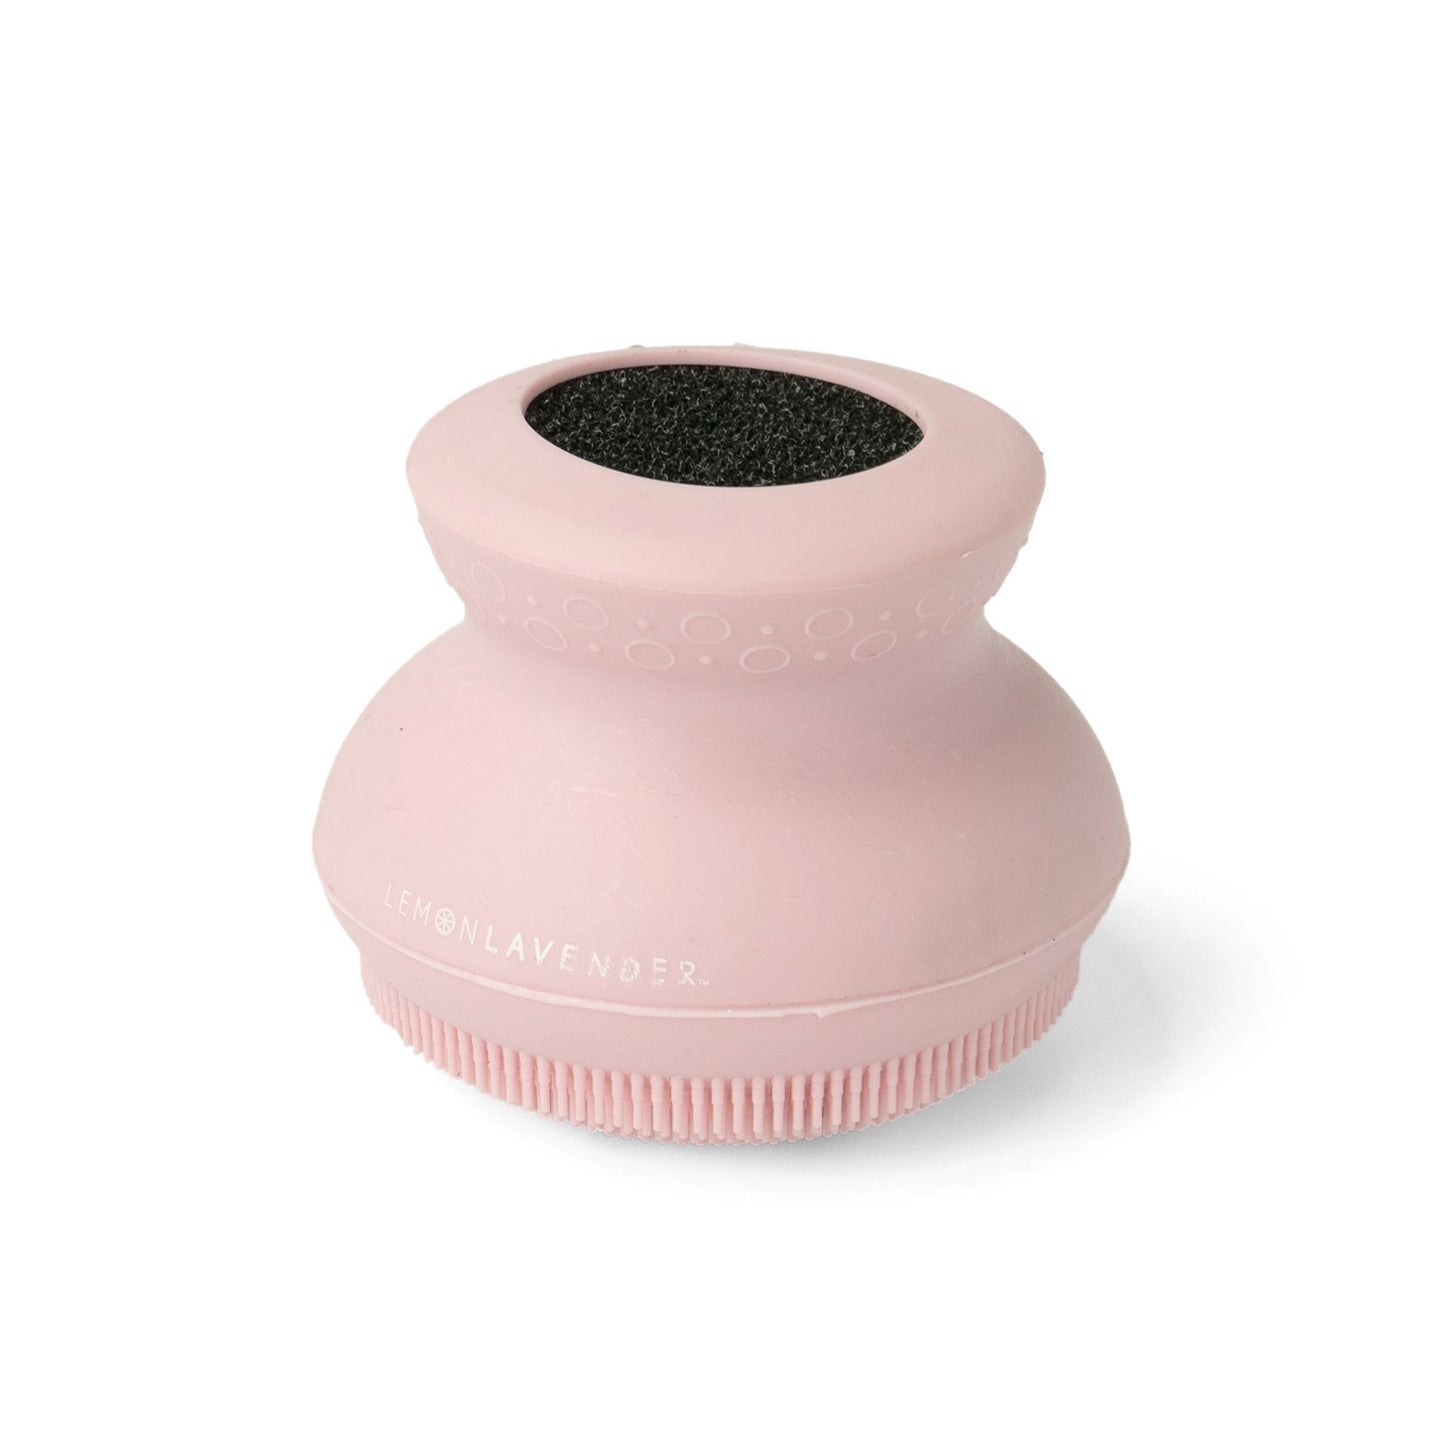 pink silicone body scrubber on a white background